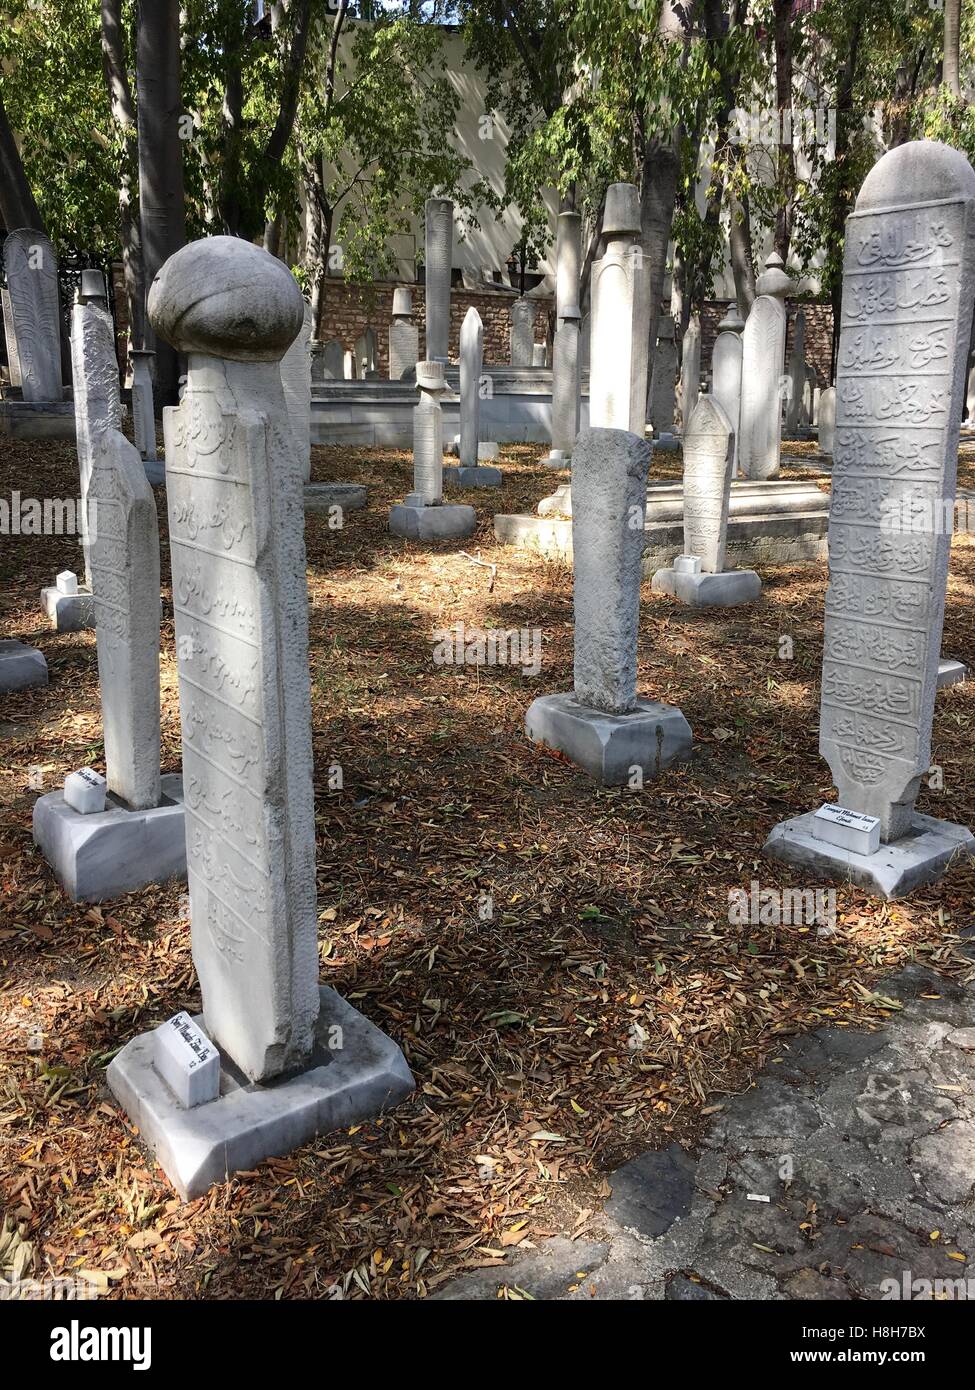 Gravestones in Galata Mevlevihane Museum. Galata Mevlevihane Museum in istanbul city. Mevlevihane located in the Beyoglu district of Istanbul province Stock Photo